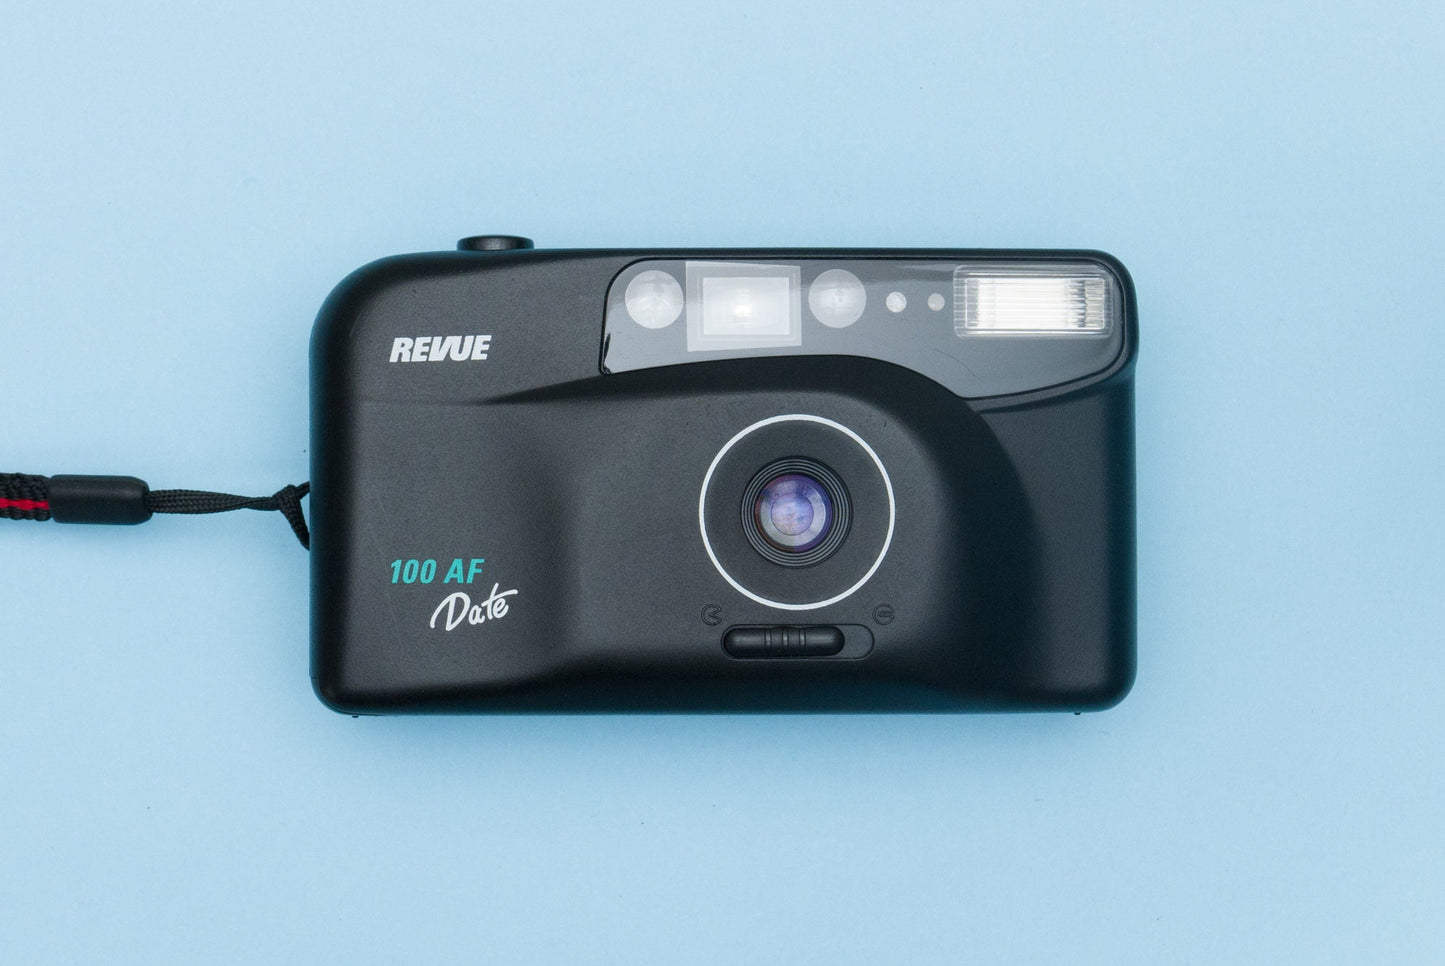 Revue 100 AF Date Compact Point and Shoot 35mm Film Camera